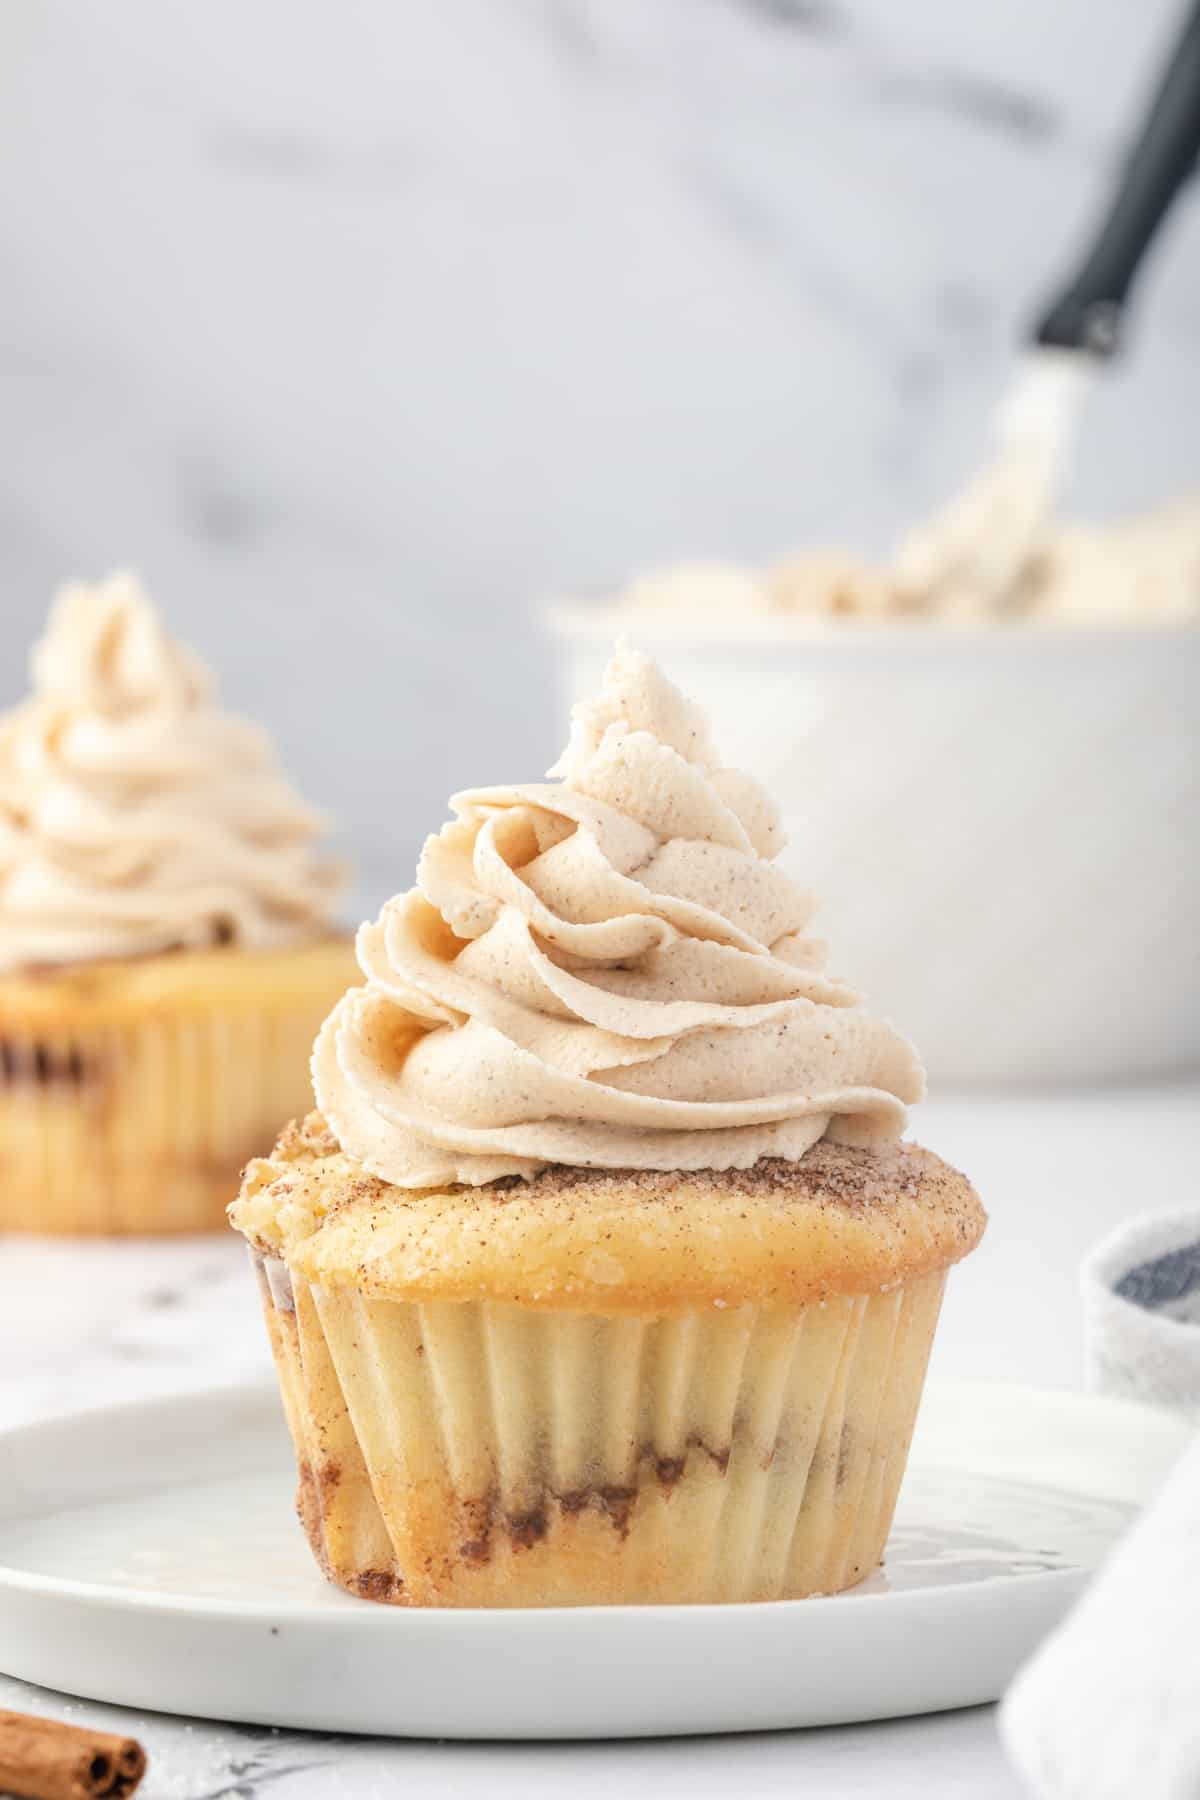 cupcake topped with cinnamon brown sugar frosting